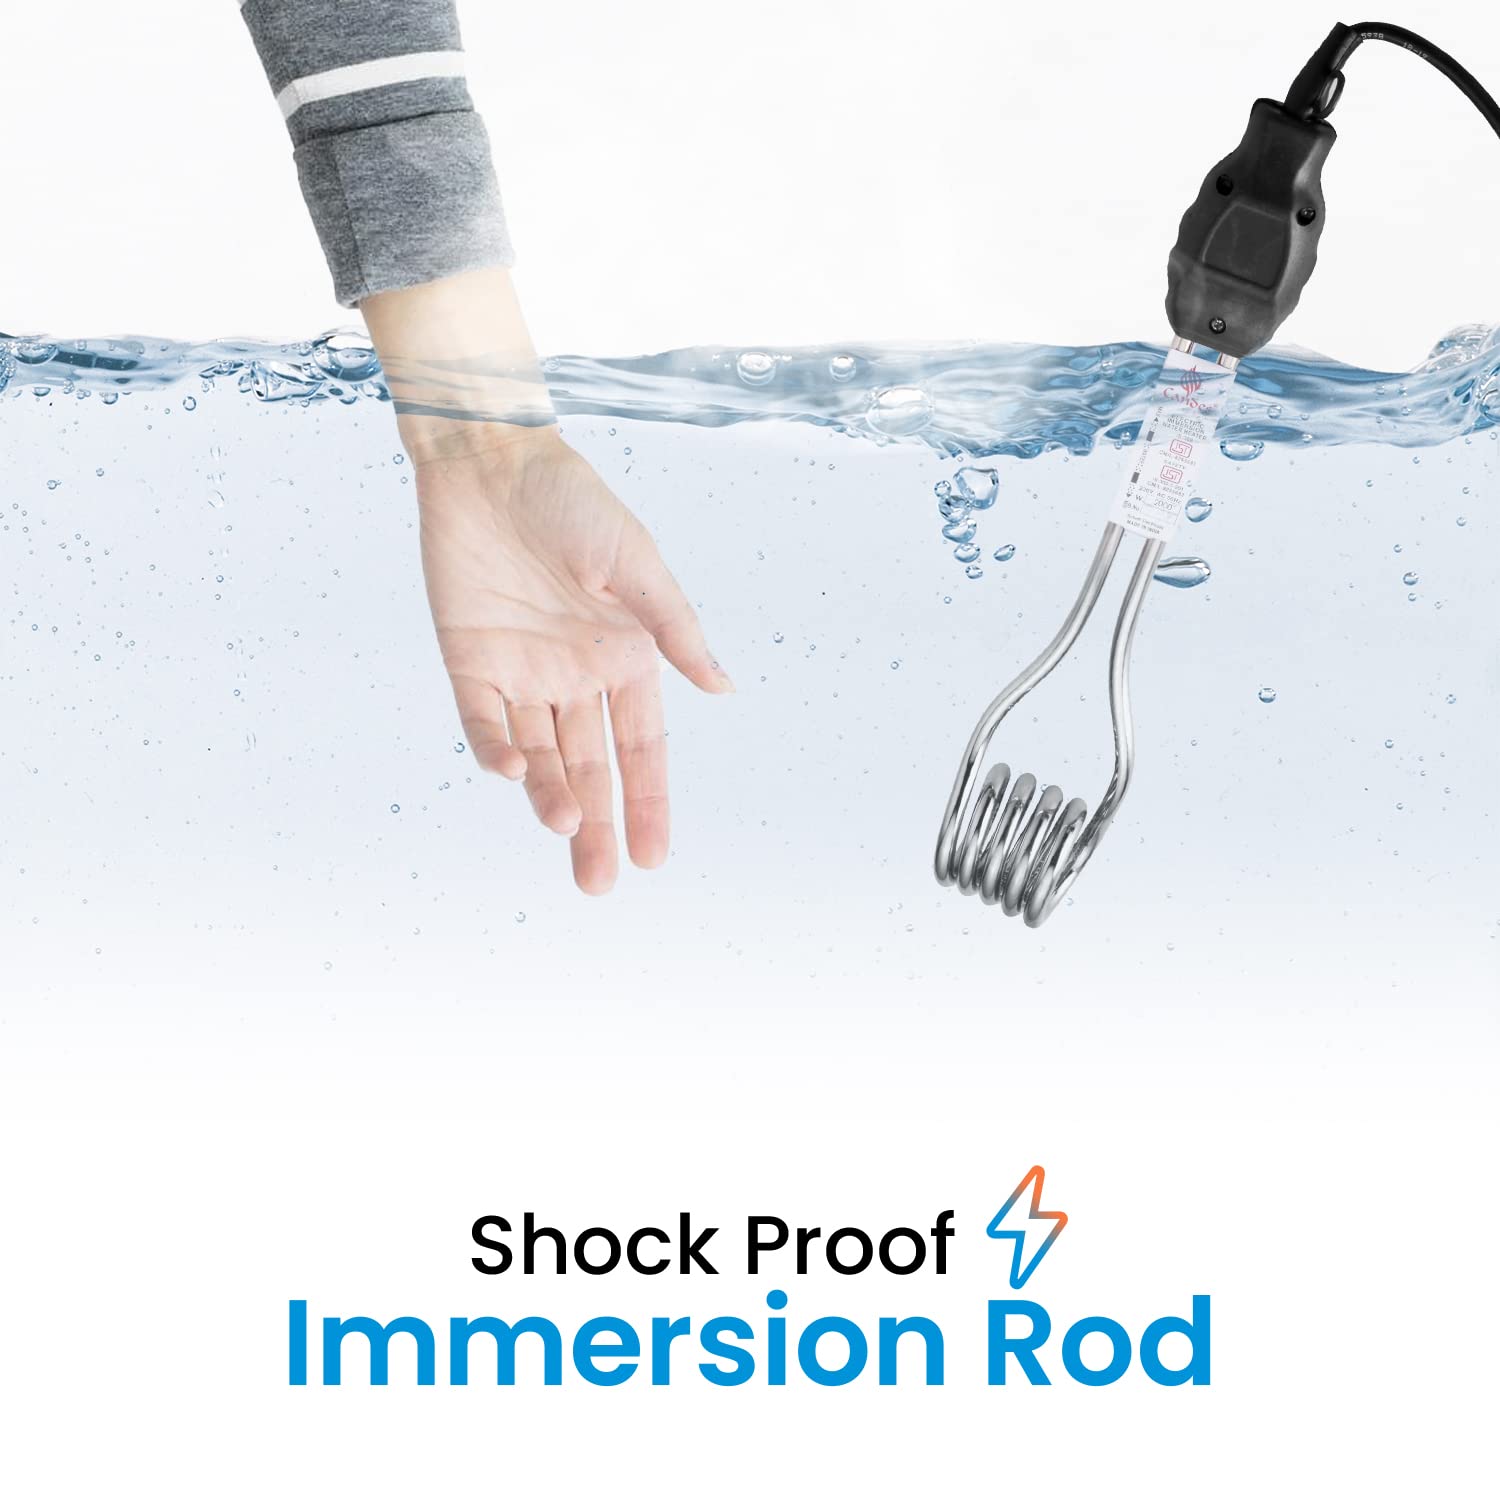 Candes Magic Shock-Proof & Water-Proof 2000 W Immersion Heater Rod (Black)